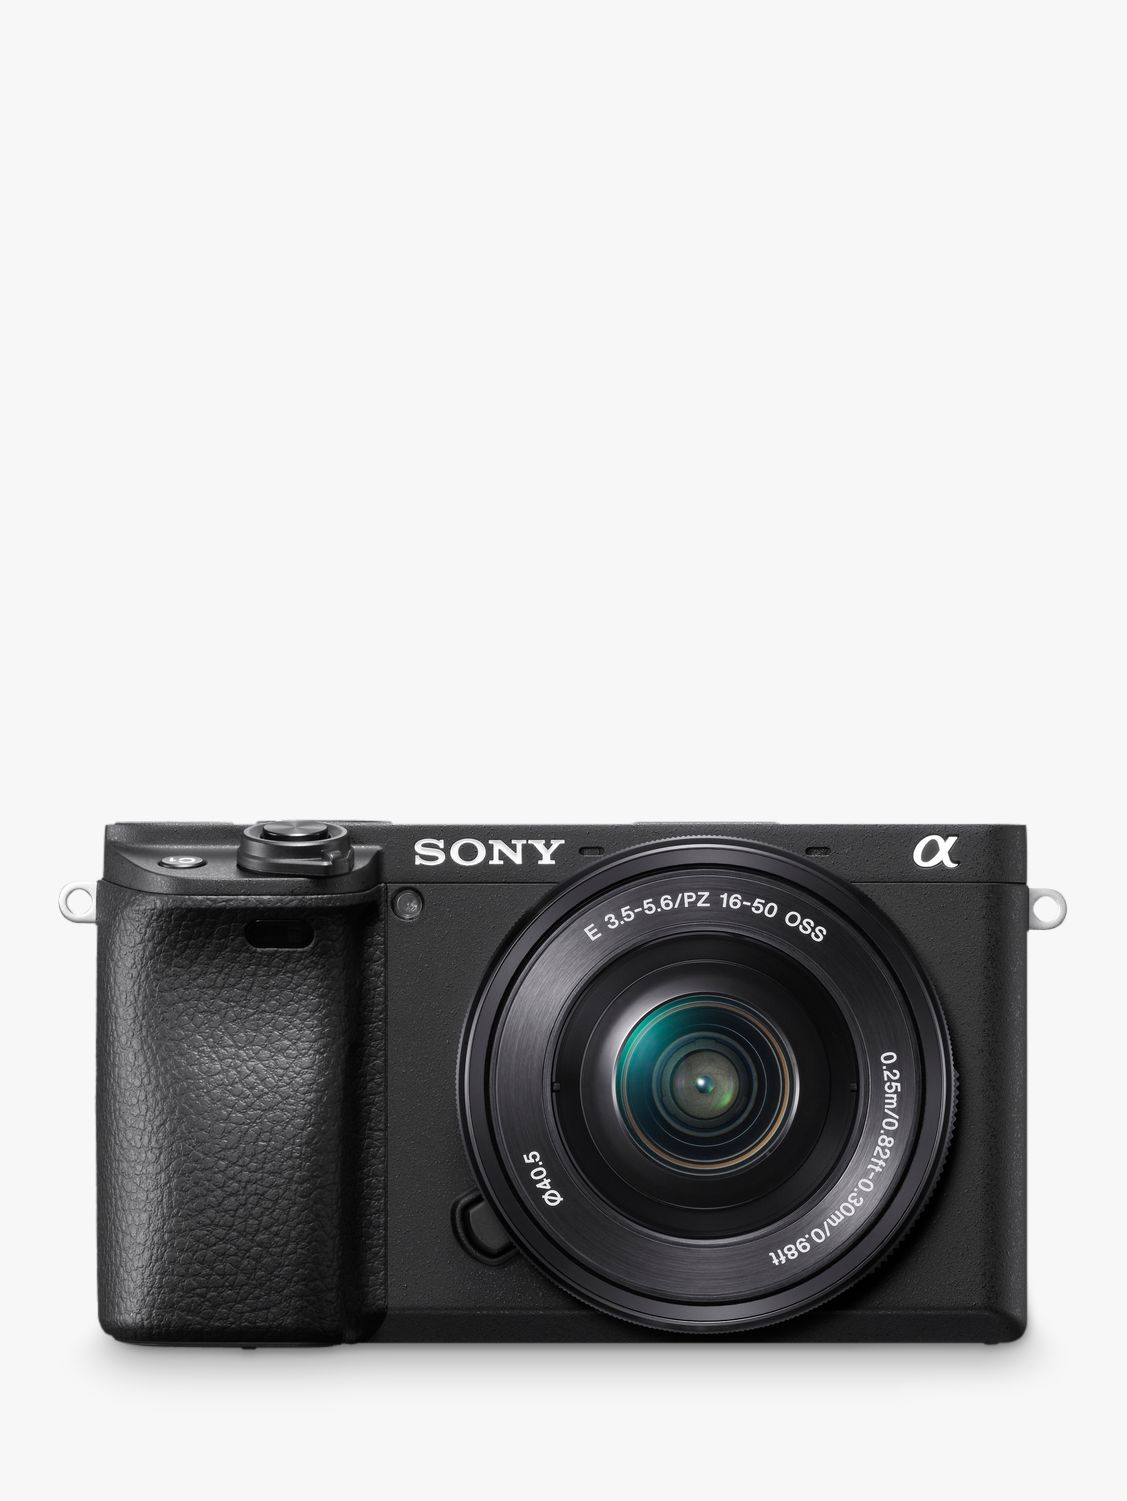 Image of Sony A6400 Compact System Camera with 1650mm Power Zoom Lens 4K Ultra HD 242MP 4D Focus WiFi Bluetooth NFC OLED EVF 3 Tilting Touch Screen Black